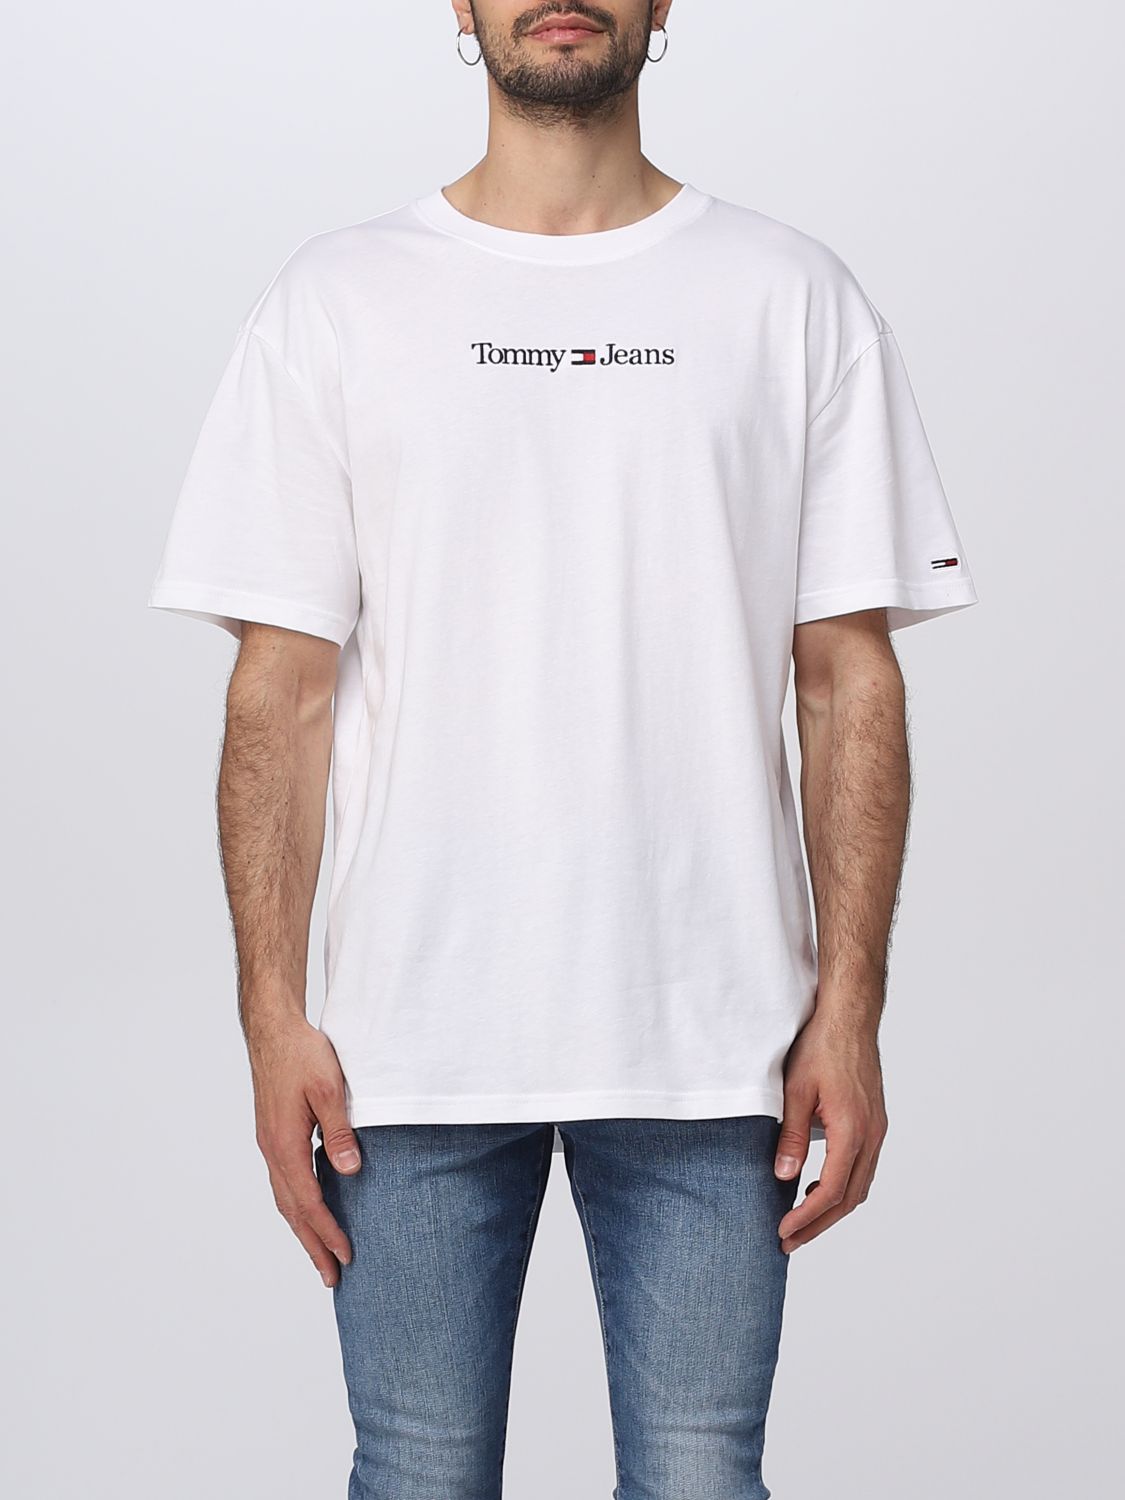 TOMMY JEANS: t-shirt for man - White | Tommy Jeans t-shirt DM0DM14984 ...